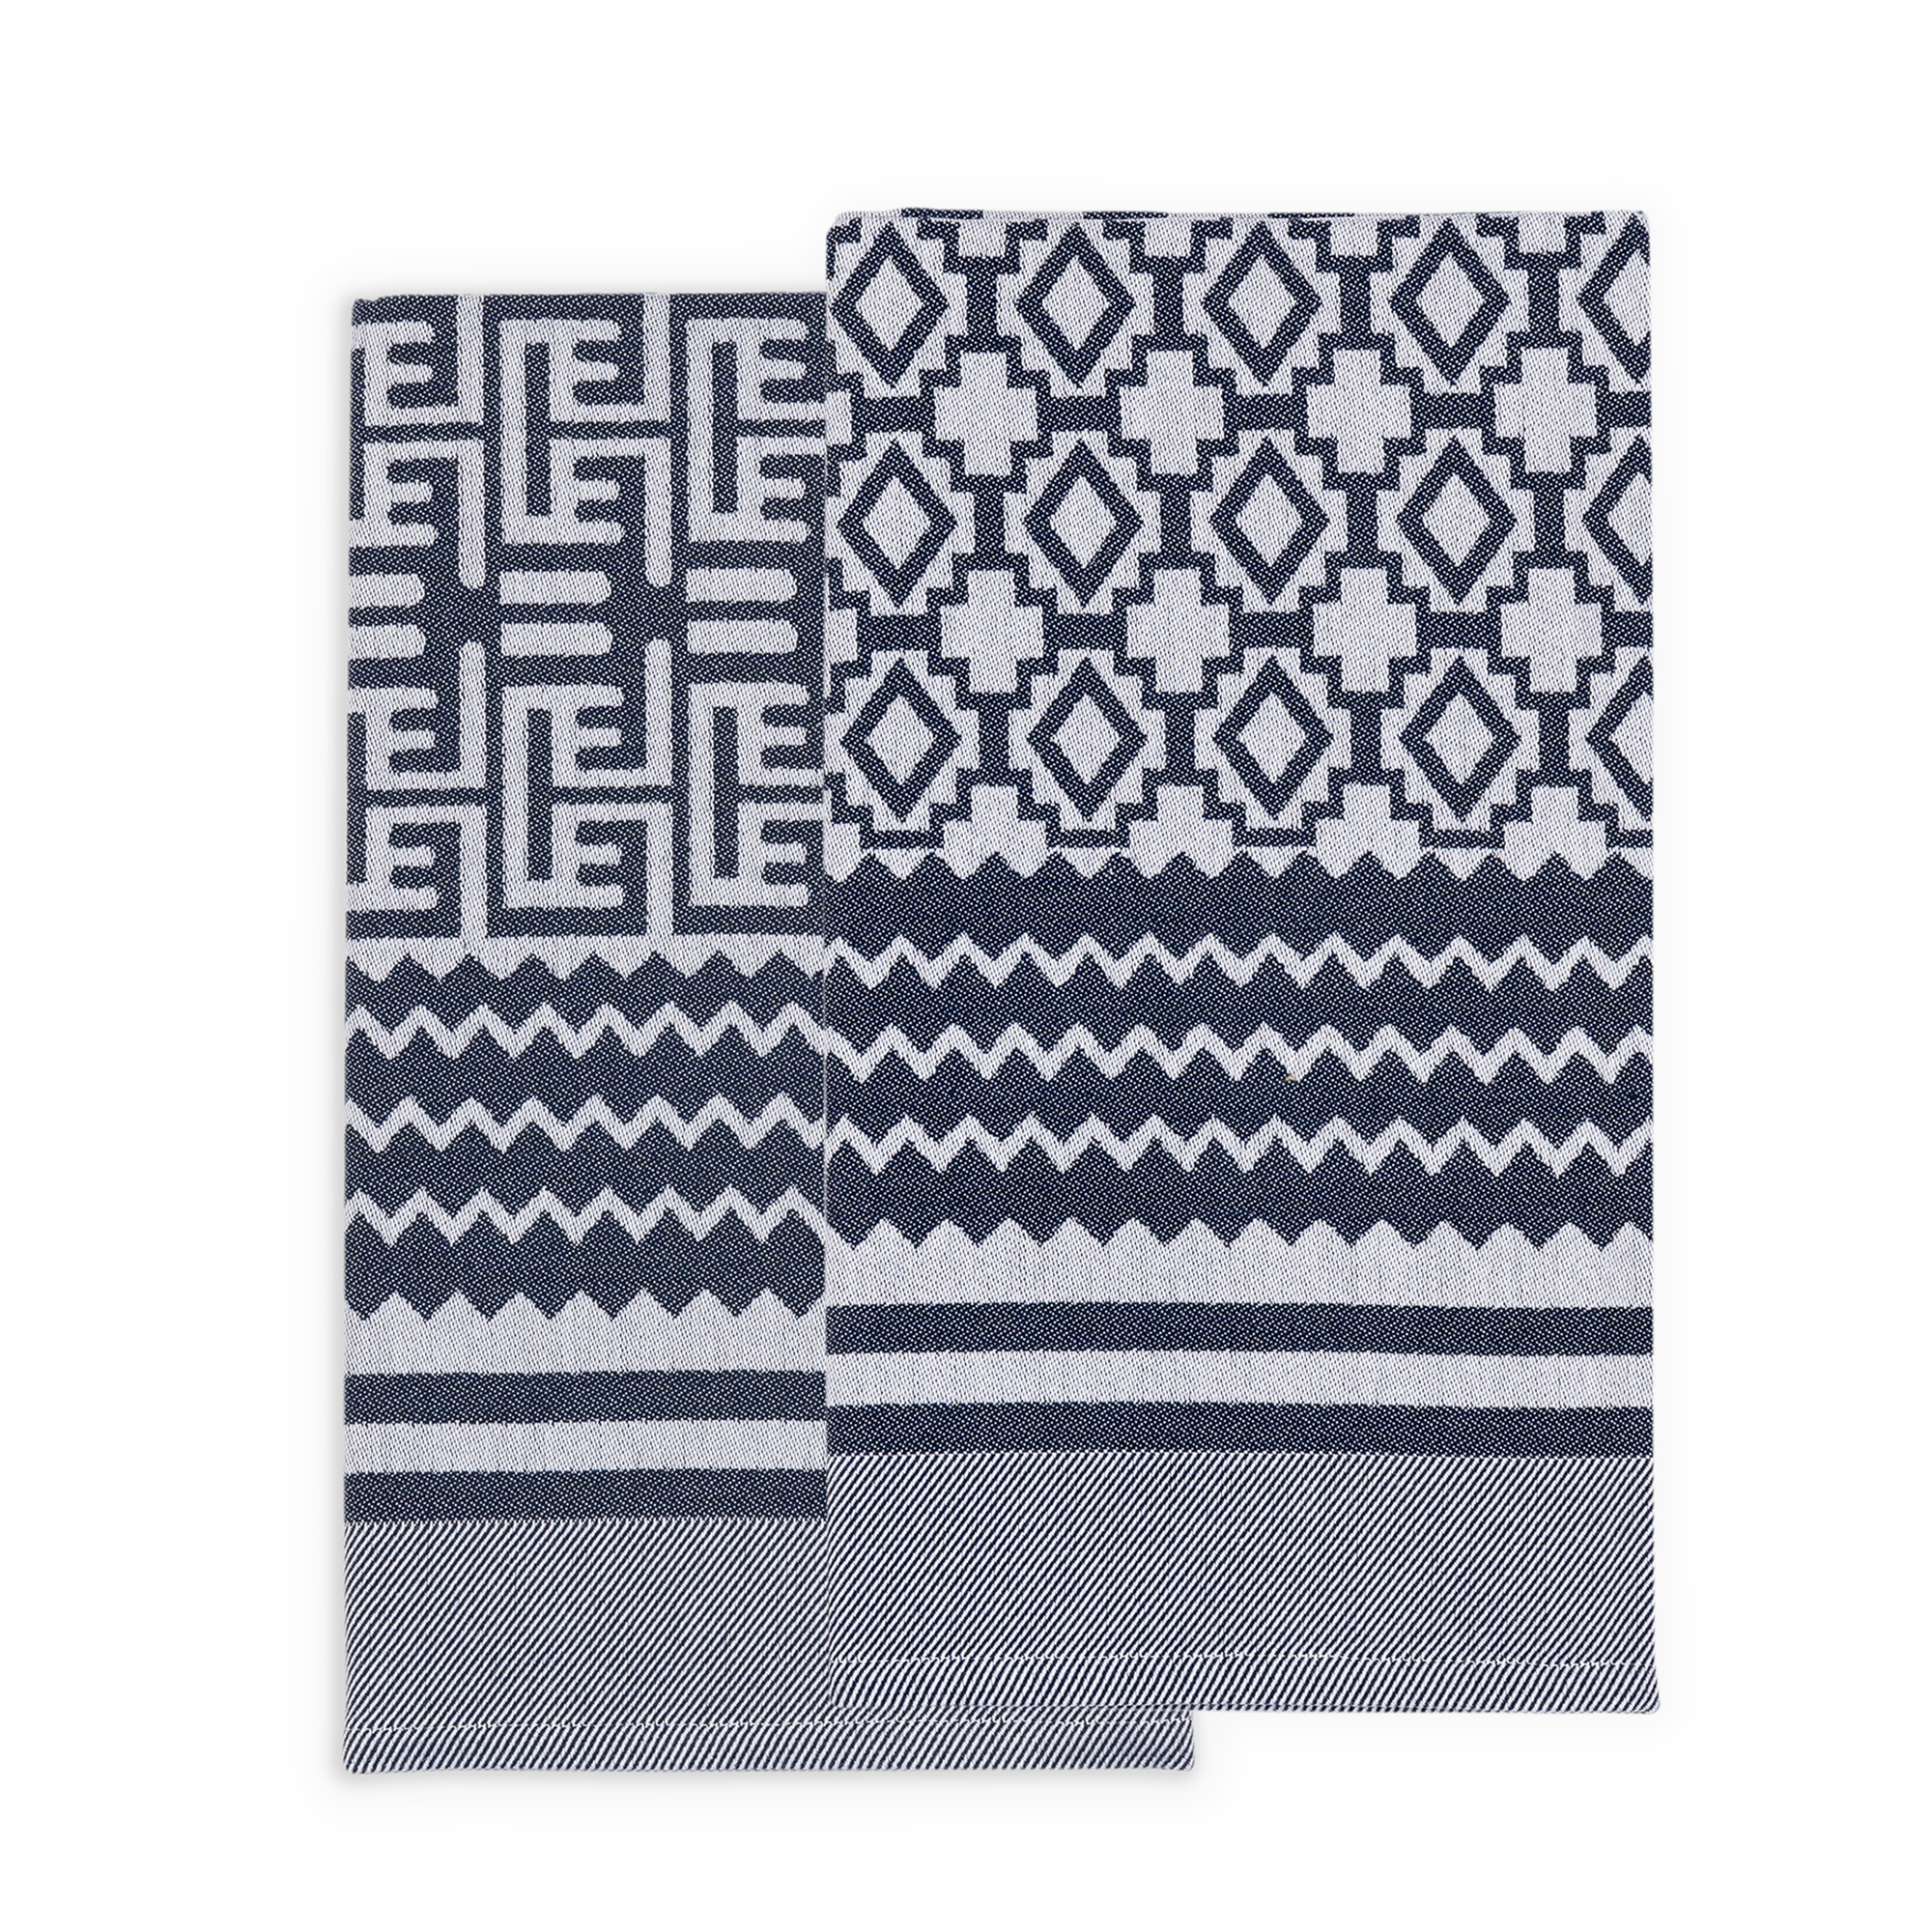 Unique tea towels inspired by Africa's rich culture, jacquard woven from 100% African cotton. Featuring diverse African patterns including geometric designs in light and dark blue, these dish towels add vibrancy to your kitchen and intrigue guests.